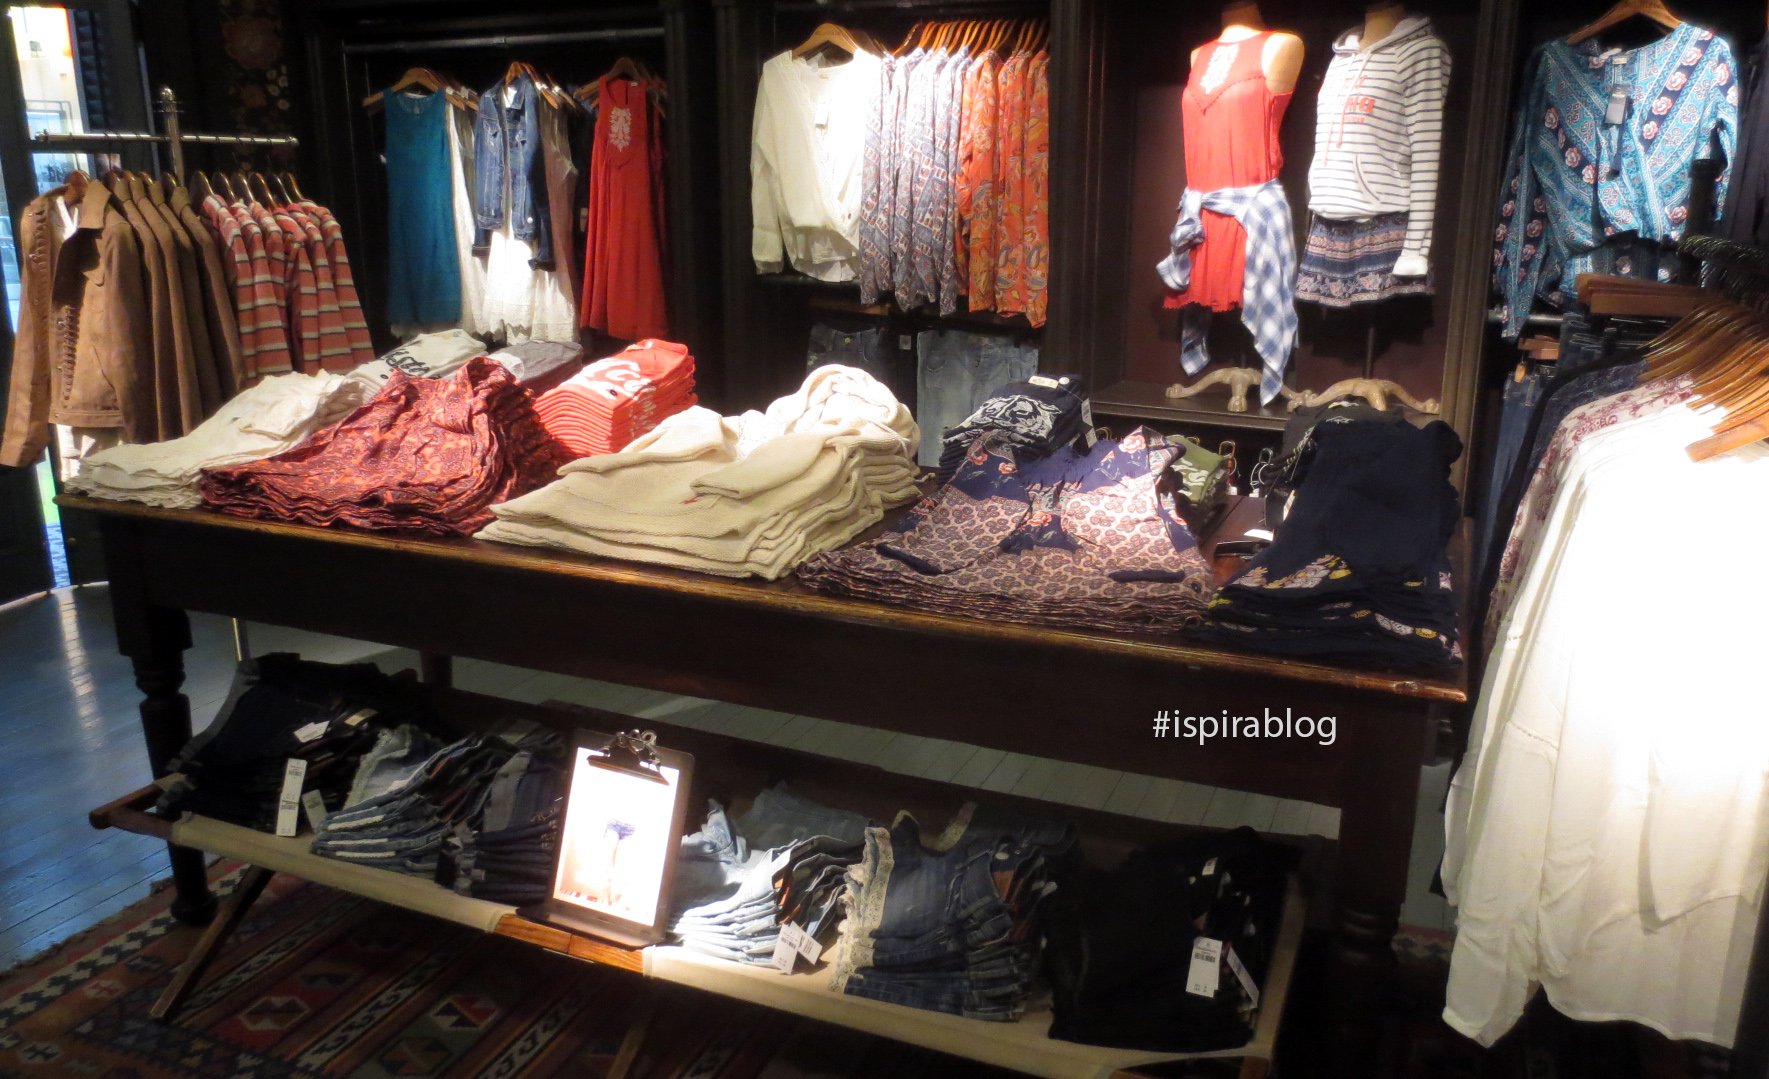 A Hollister Clothing Retail Store in an Indoor Mall Editorial Photo - Image  of girls, retail: 159889326